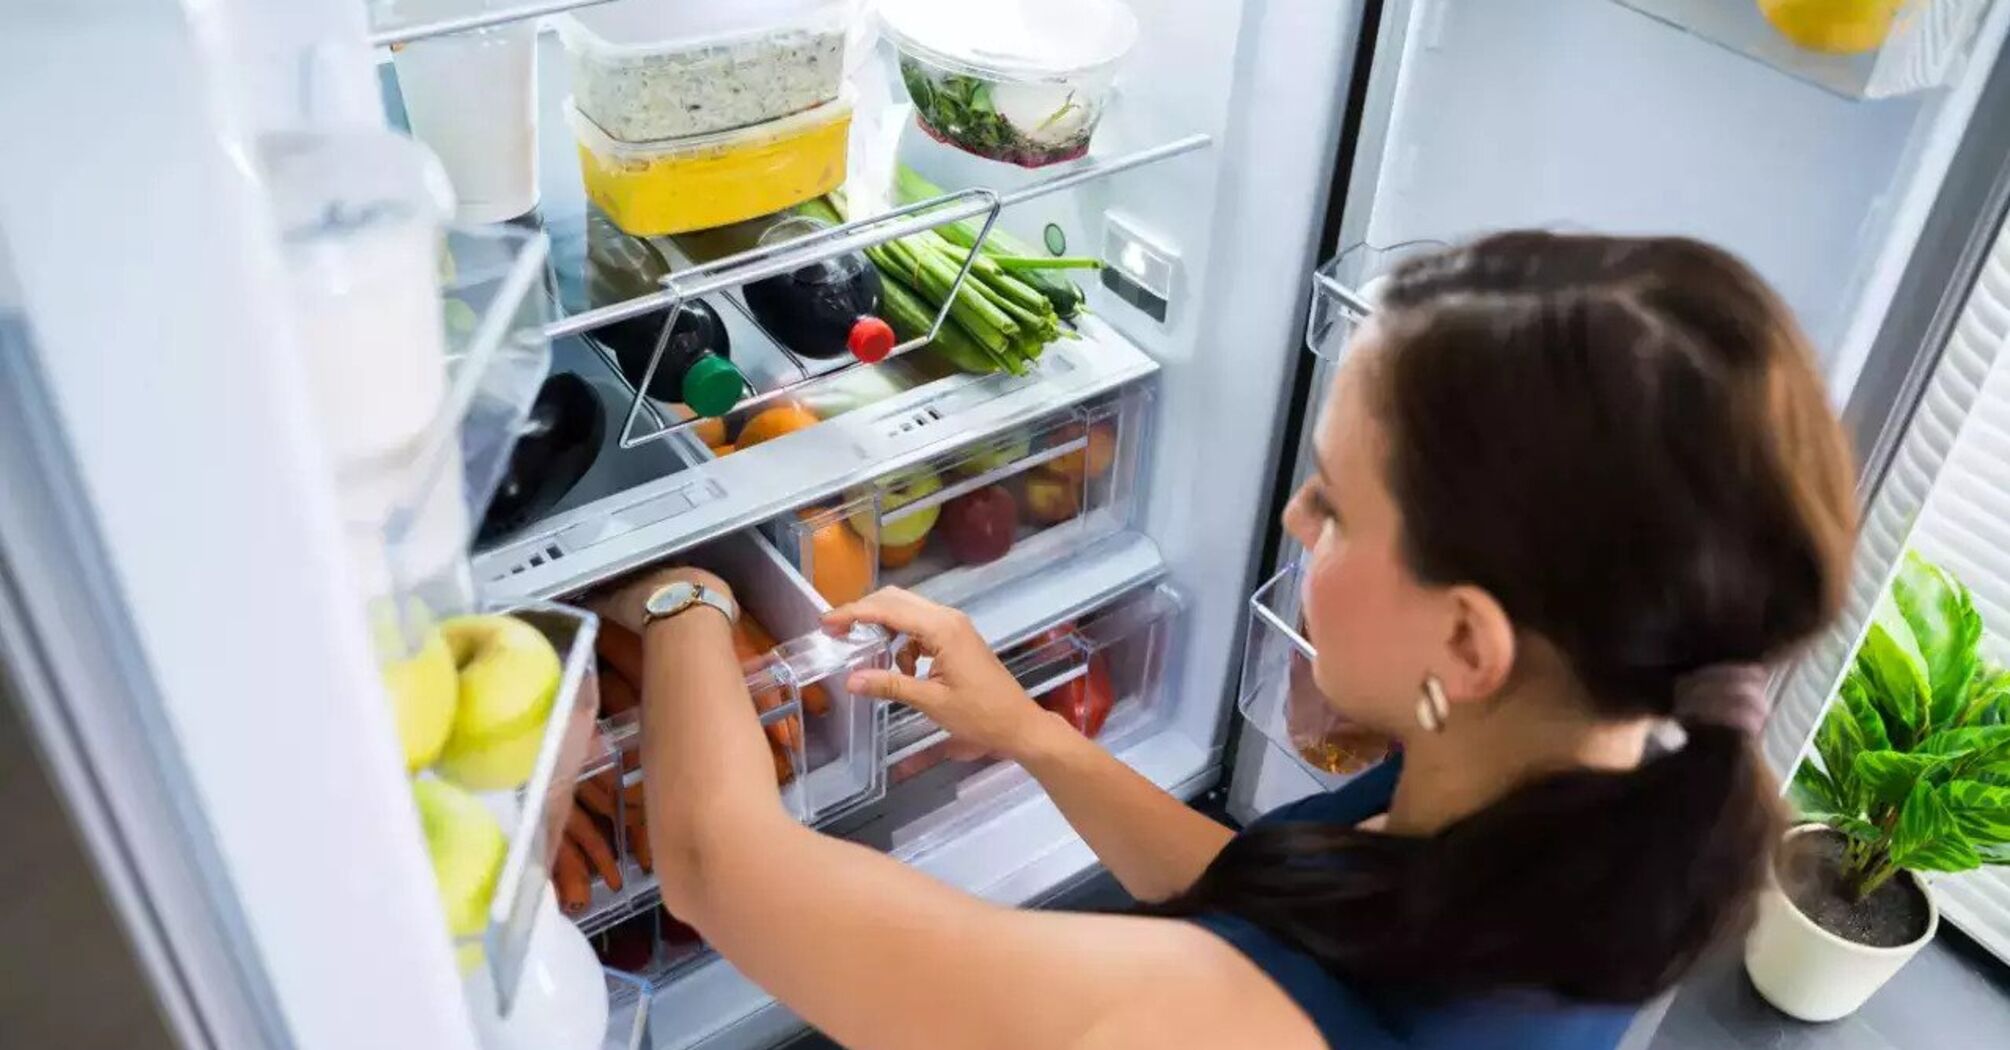 How to keep food fresh in the refrigerator